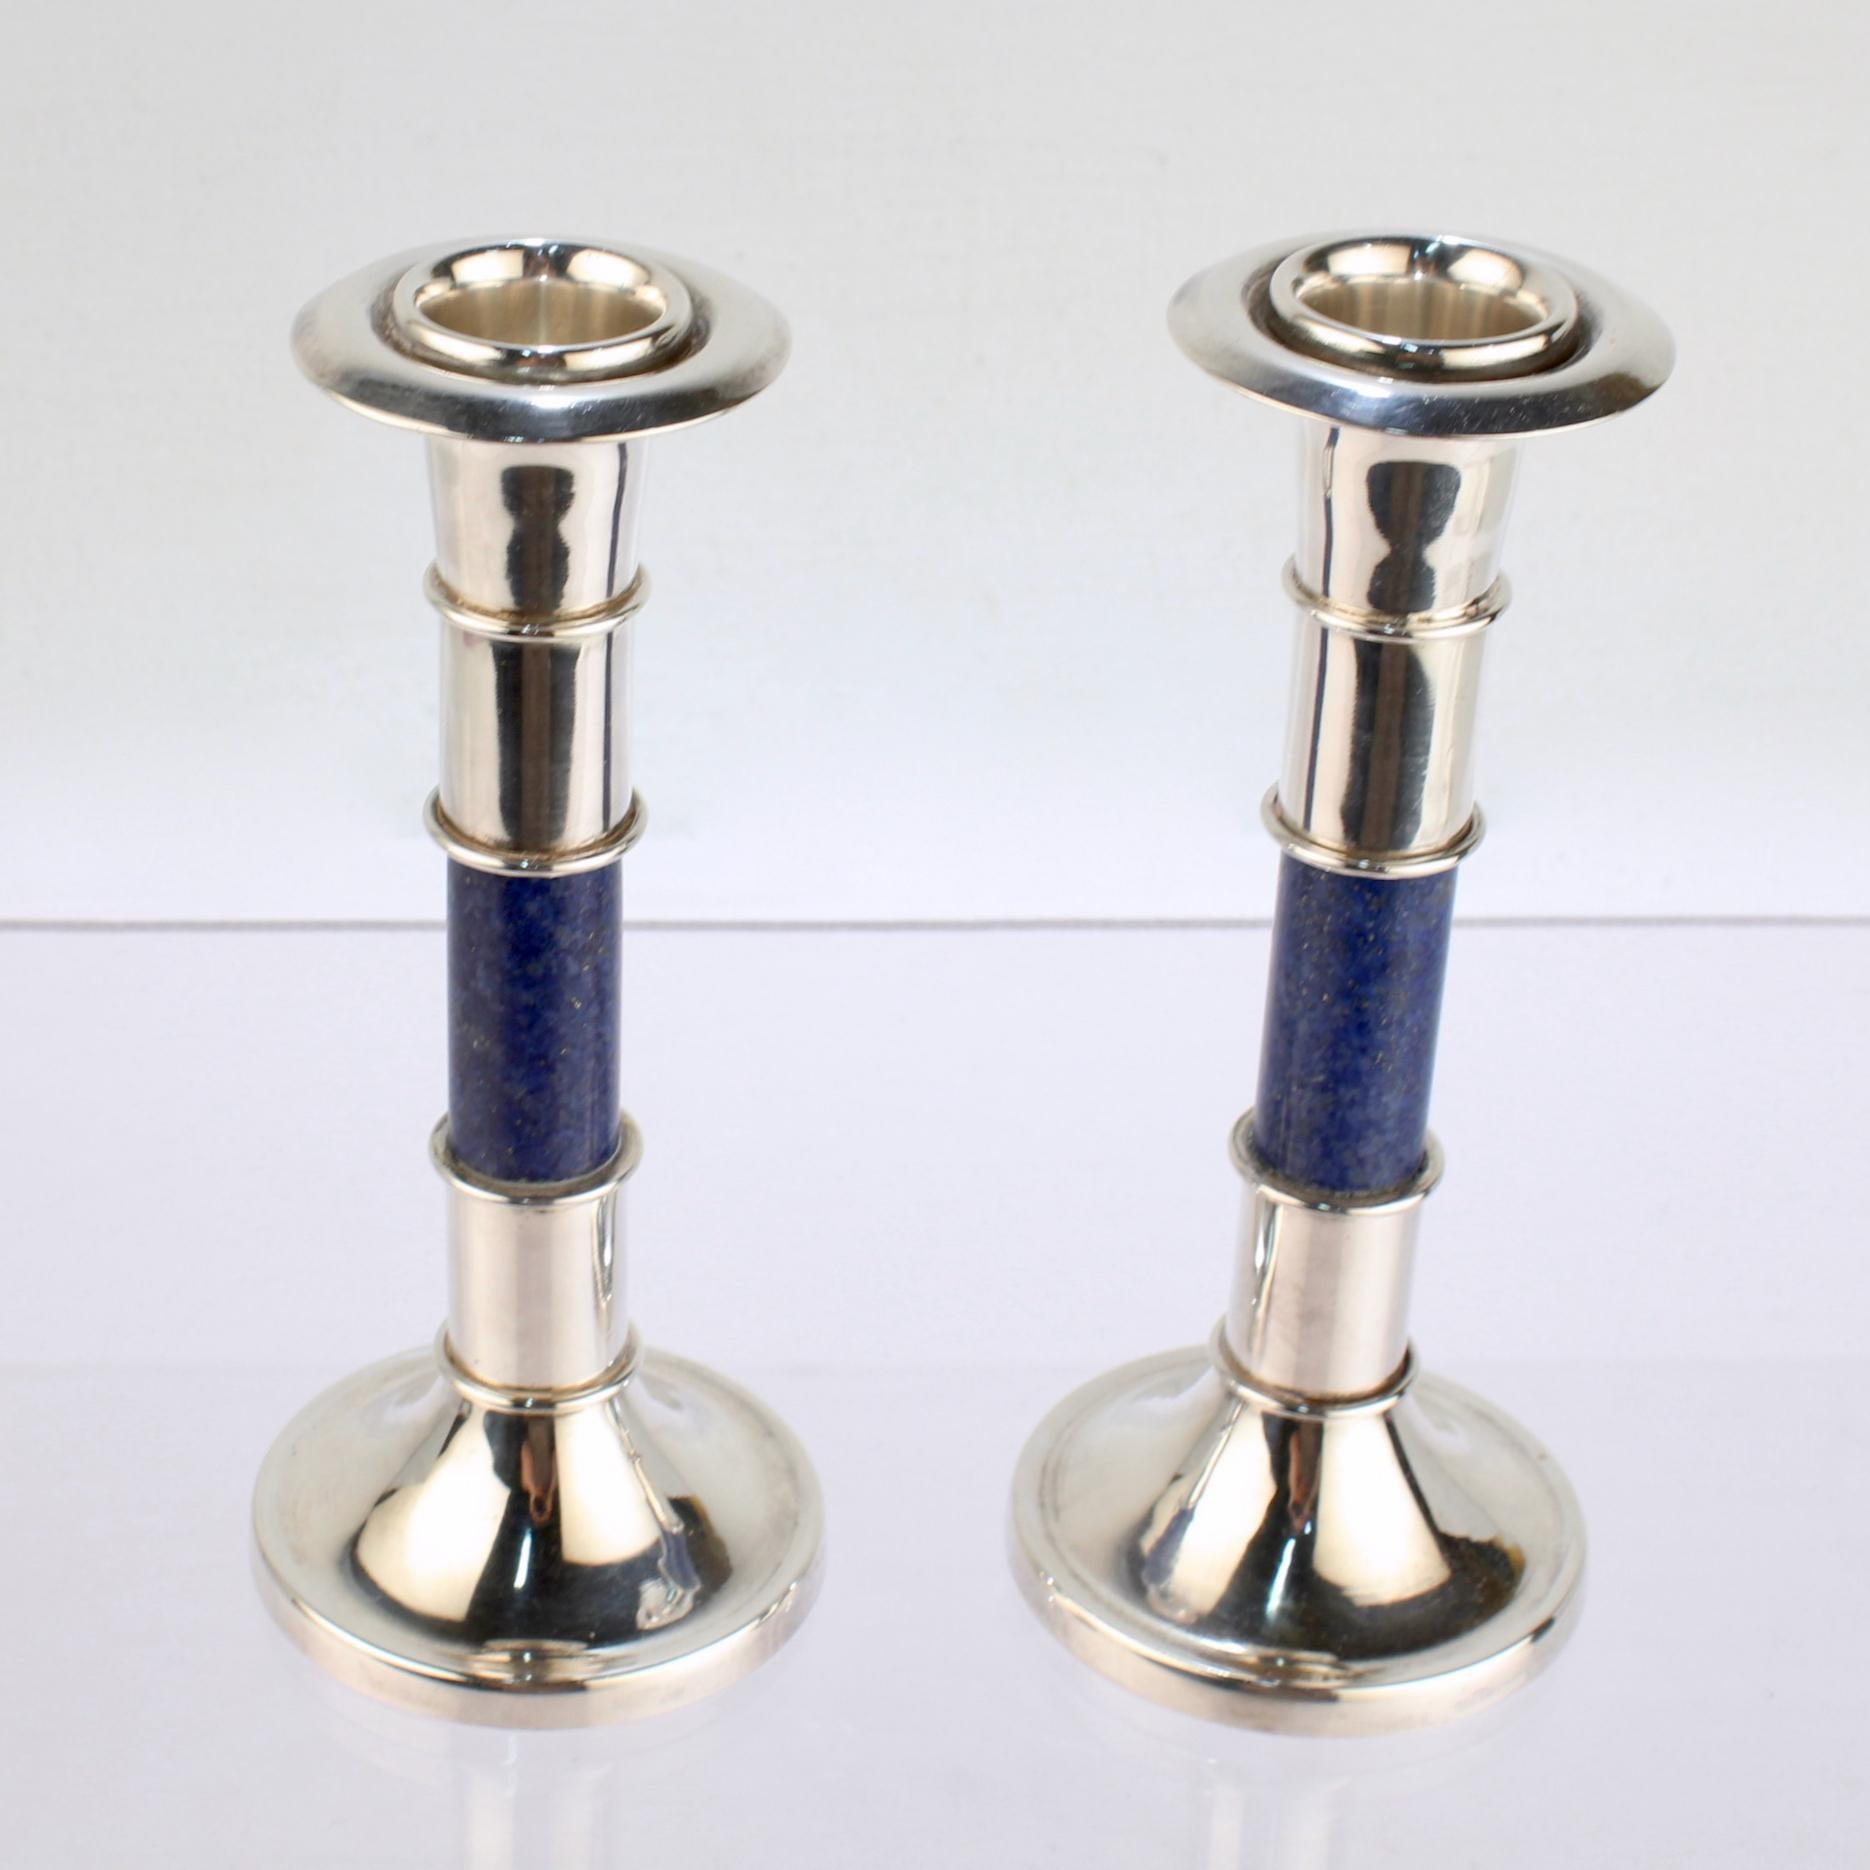 Pair of Sterling Silver & Lapis Lazuli Candlesticks or Candle Holders 1